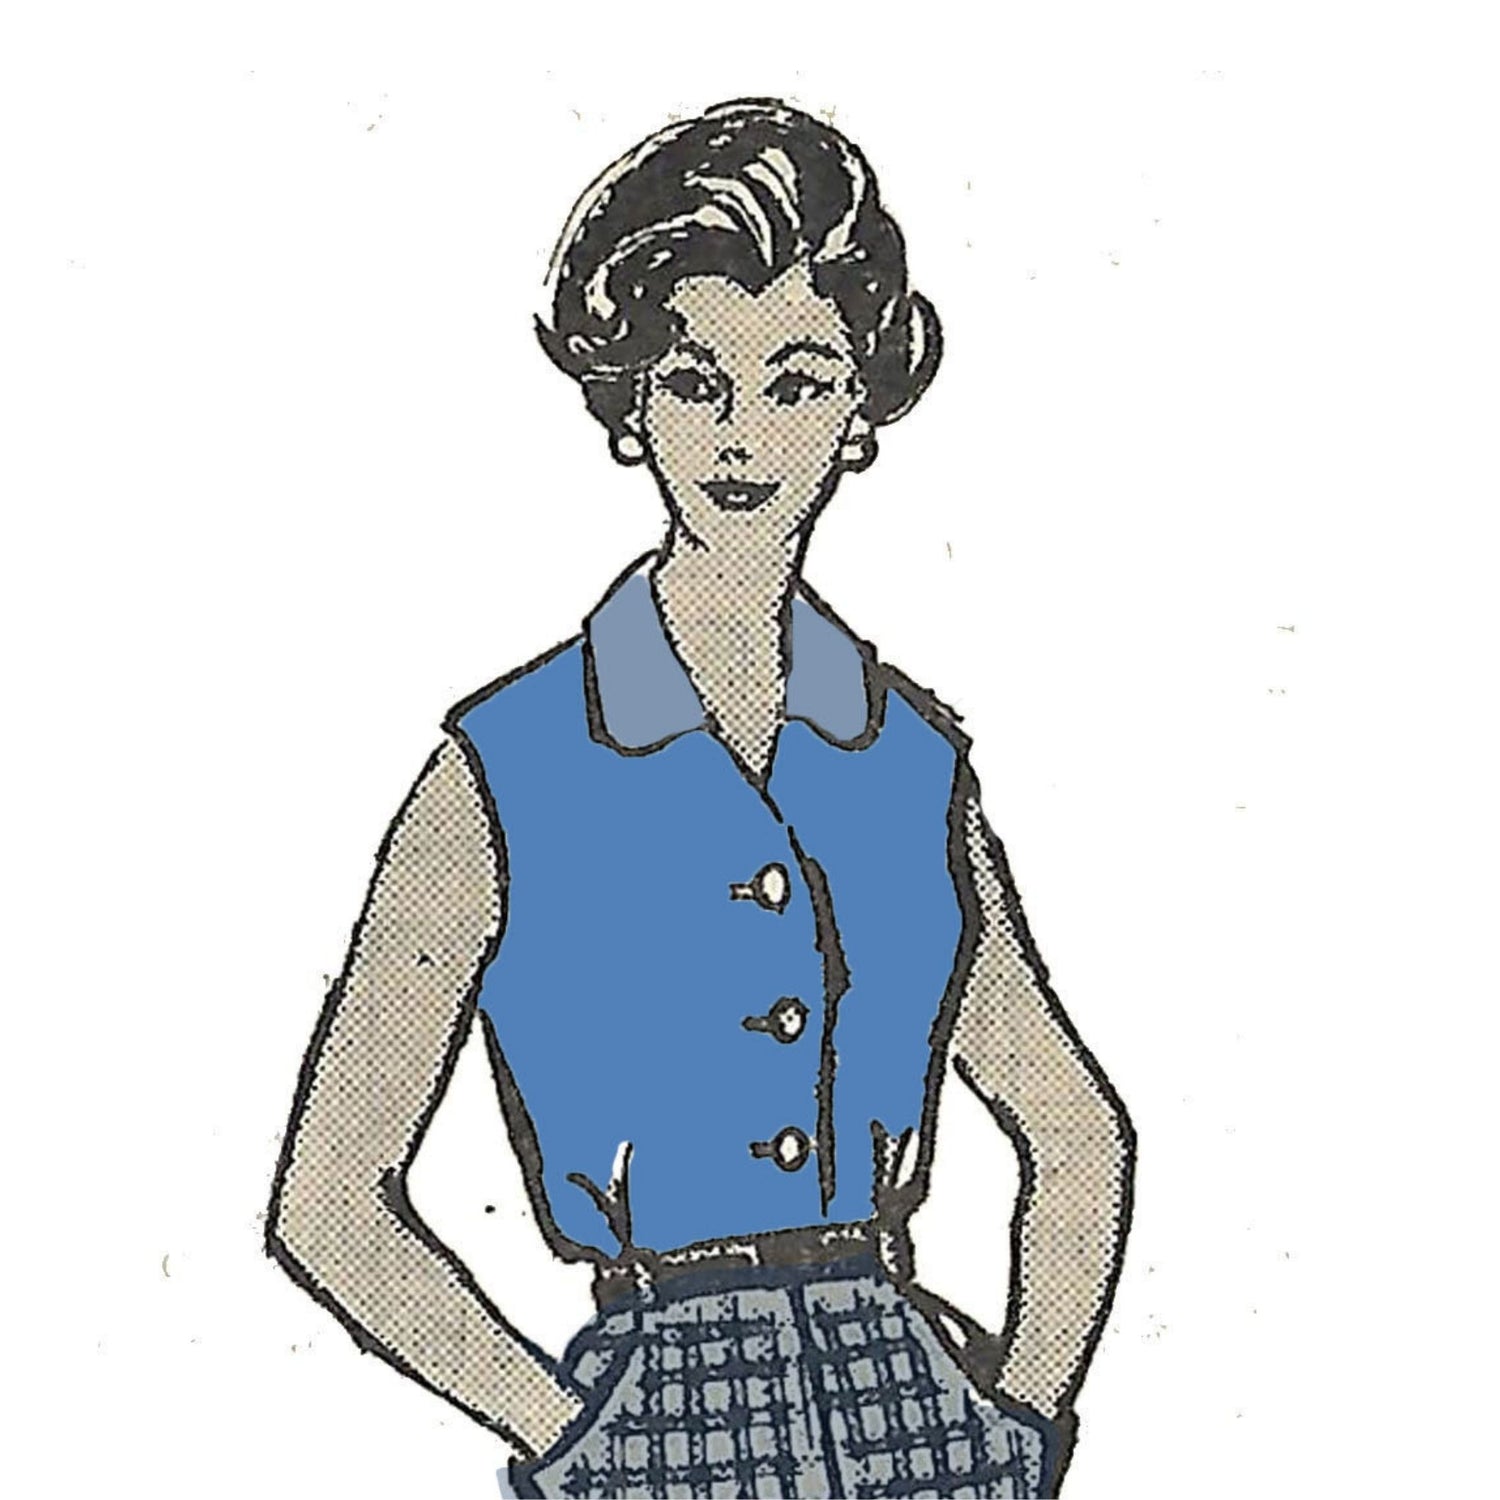 Model wearing 1950 blouse and slack made from Marian Martin 4787 pattern